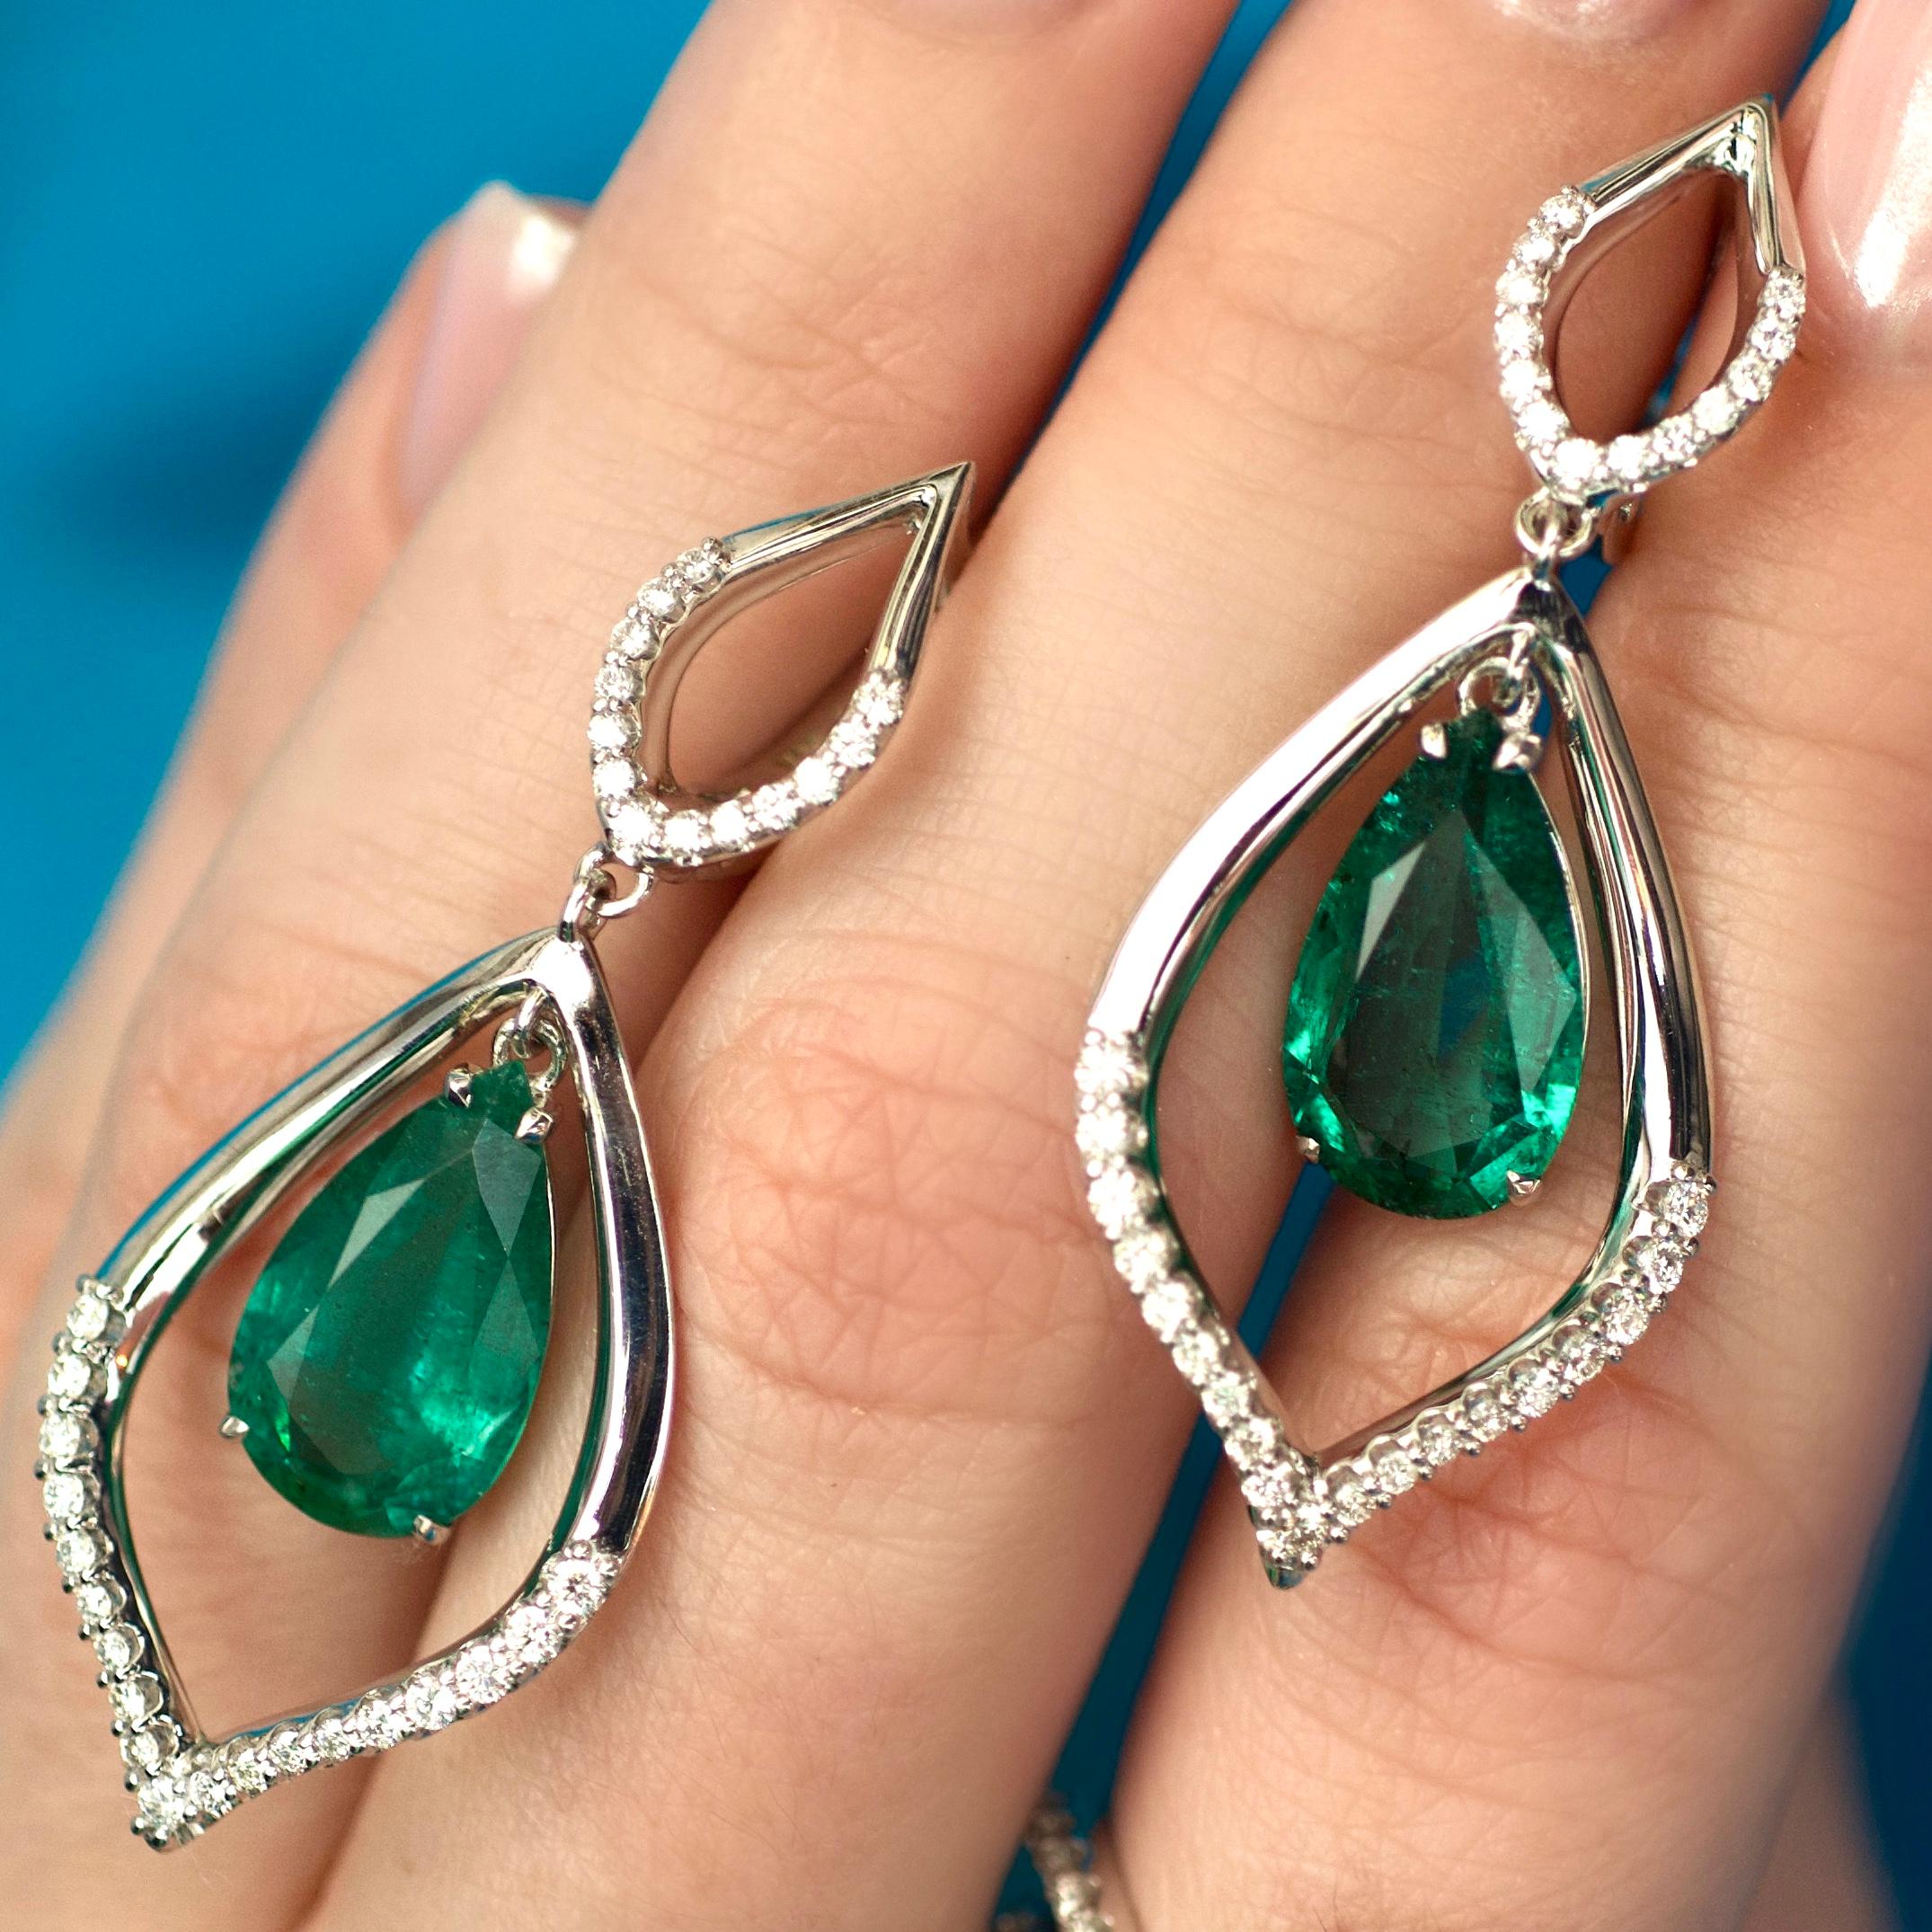 These earrings are very elegant, smooth and airy - white gold, some diamonds and two beautiful emeralds with rich green color from Zambia. 
With such earrings you could make any of your outfits looking fabulous. 
They will move with every step you